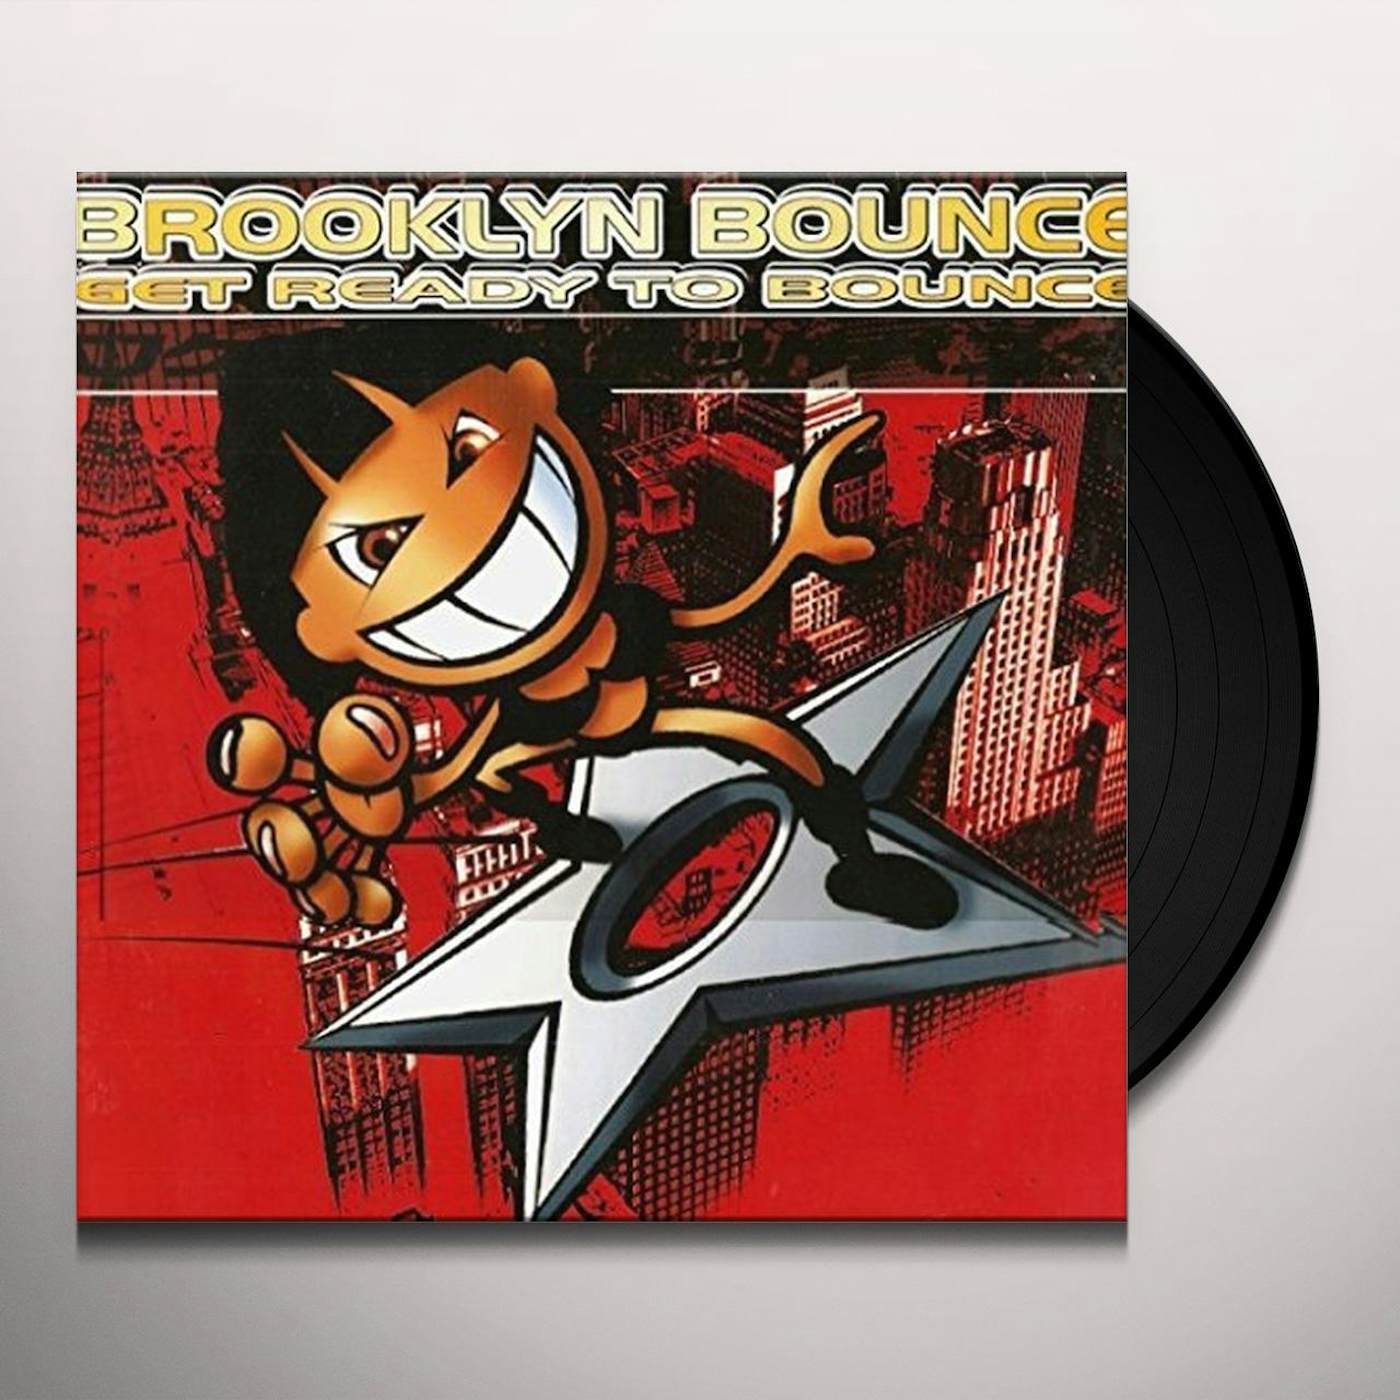 Brooklyn Bounce Get Ready to Bounce Vinyl Record